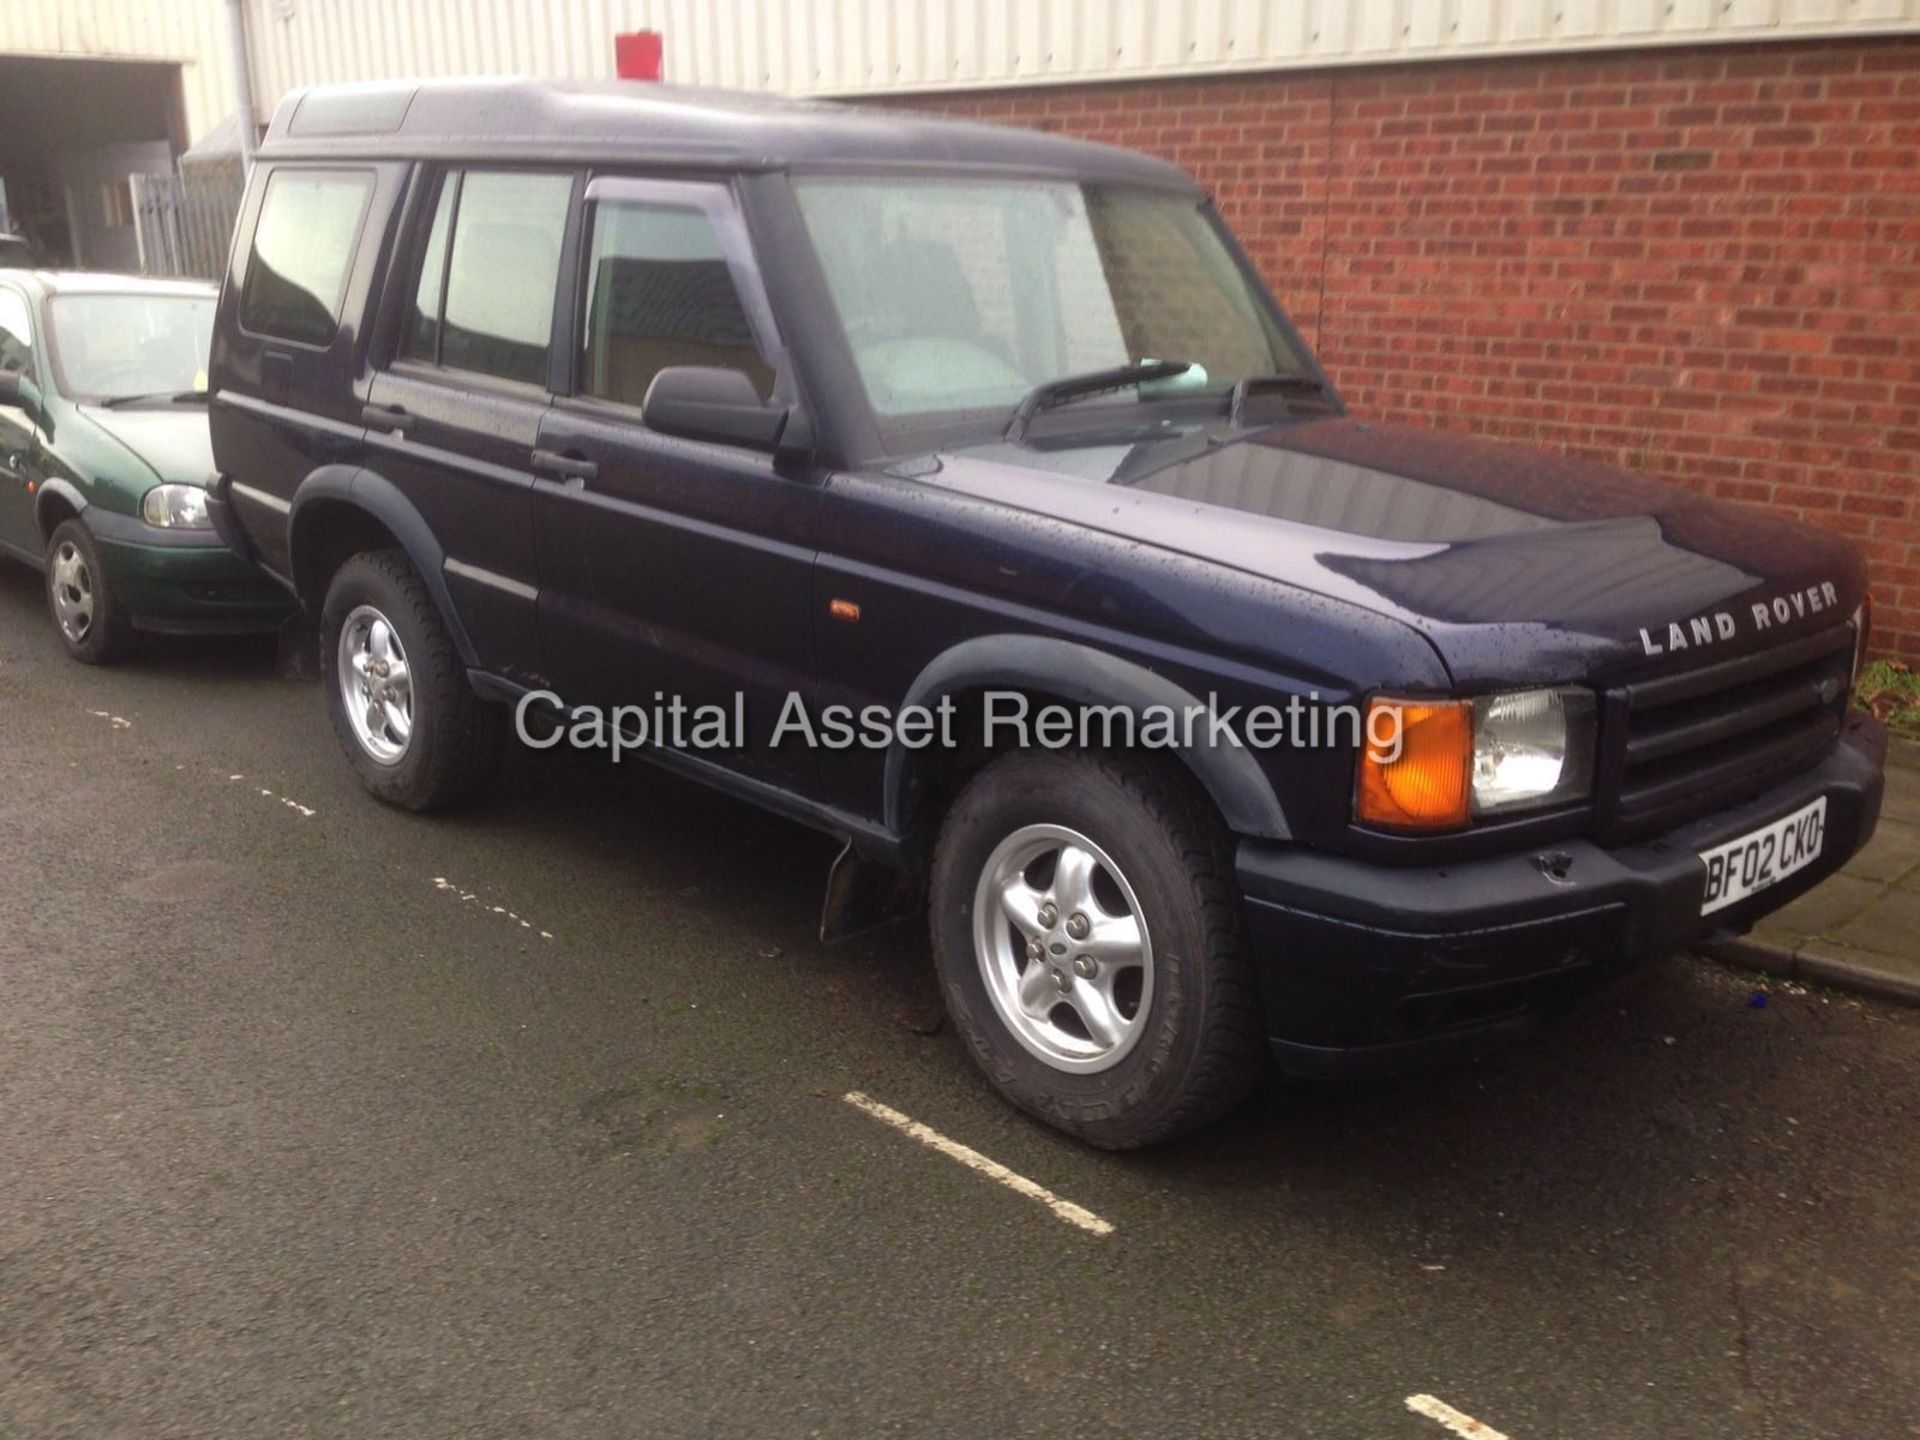 (On Sale) LANDROVER DISCOVERY "TD5" GS - 02 REG - LOW MILES - 7 SEATER - LOOK! - NO VAT TO PAY